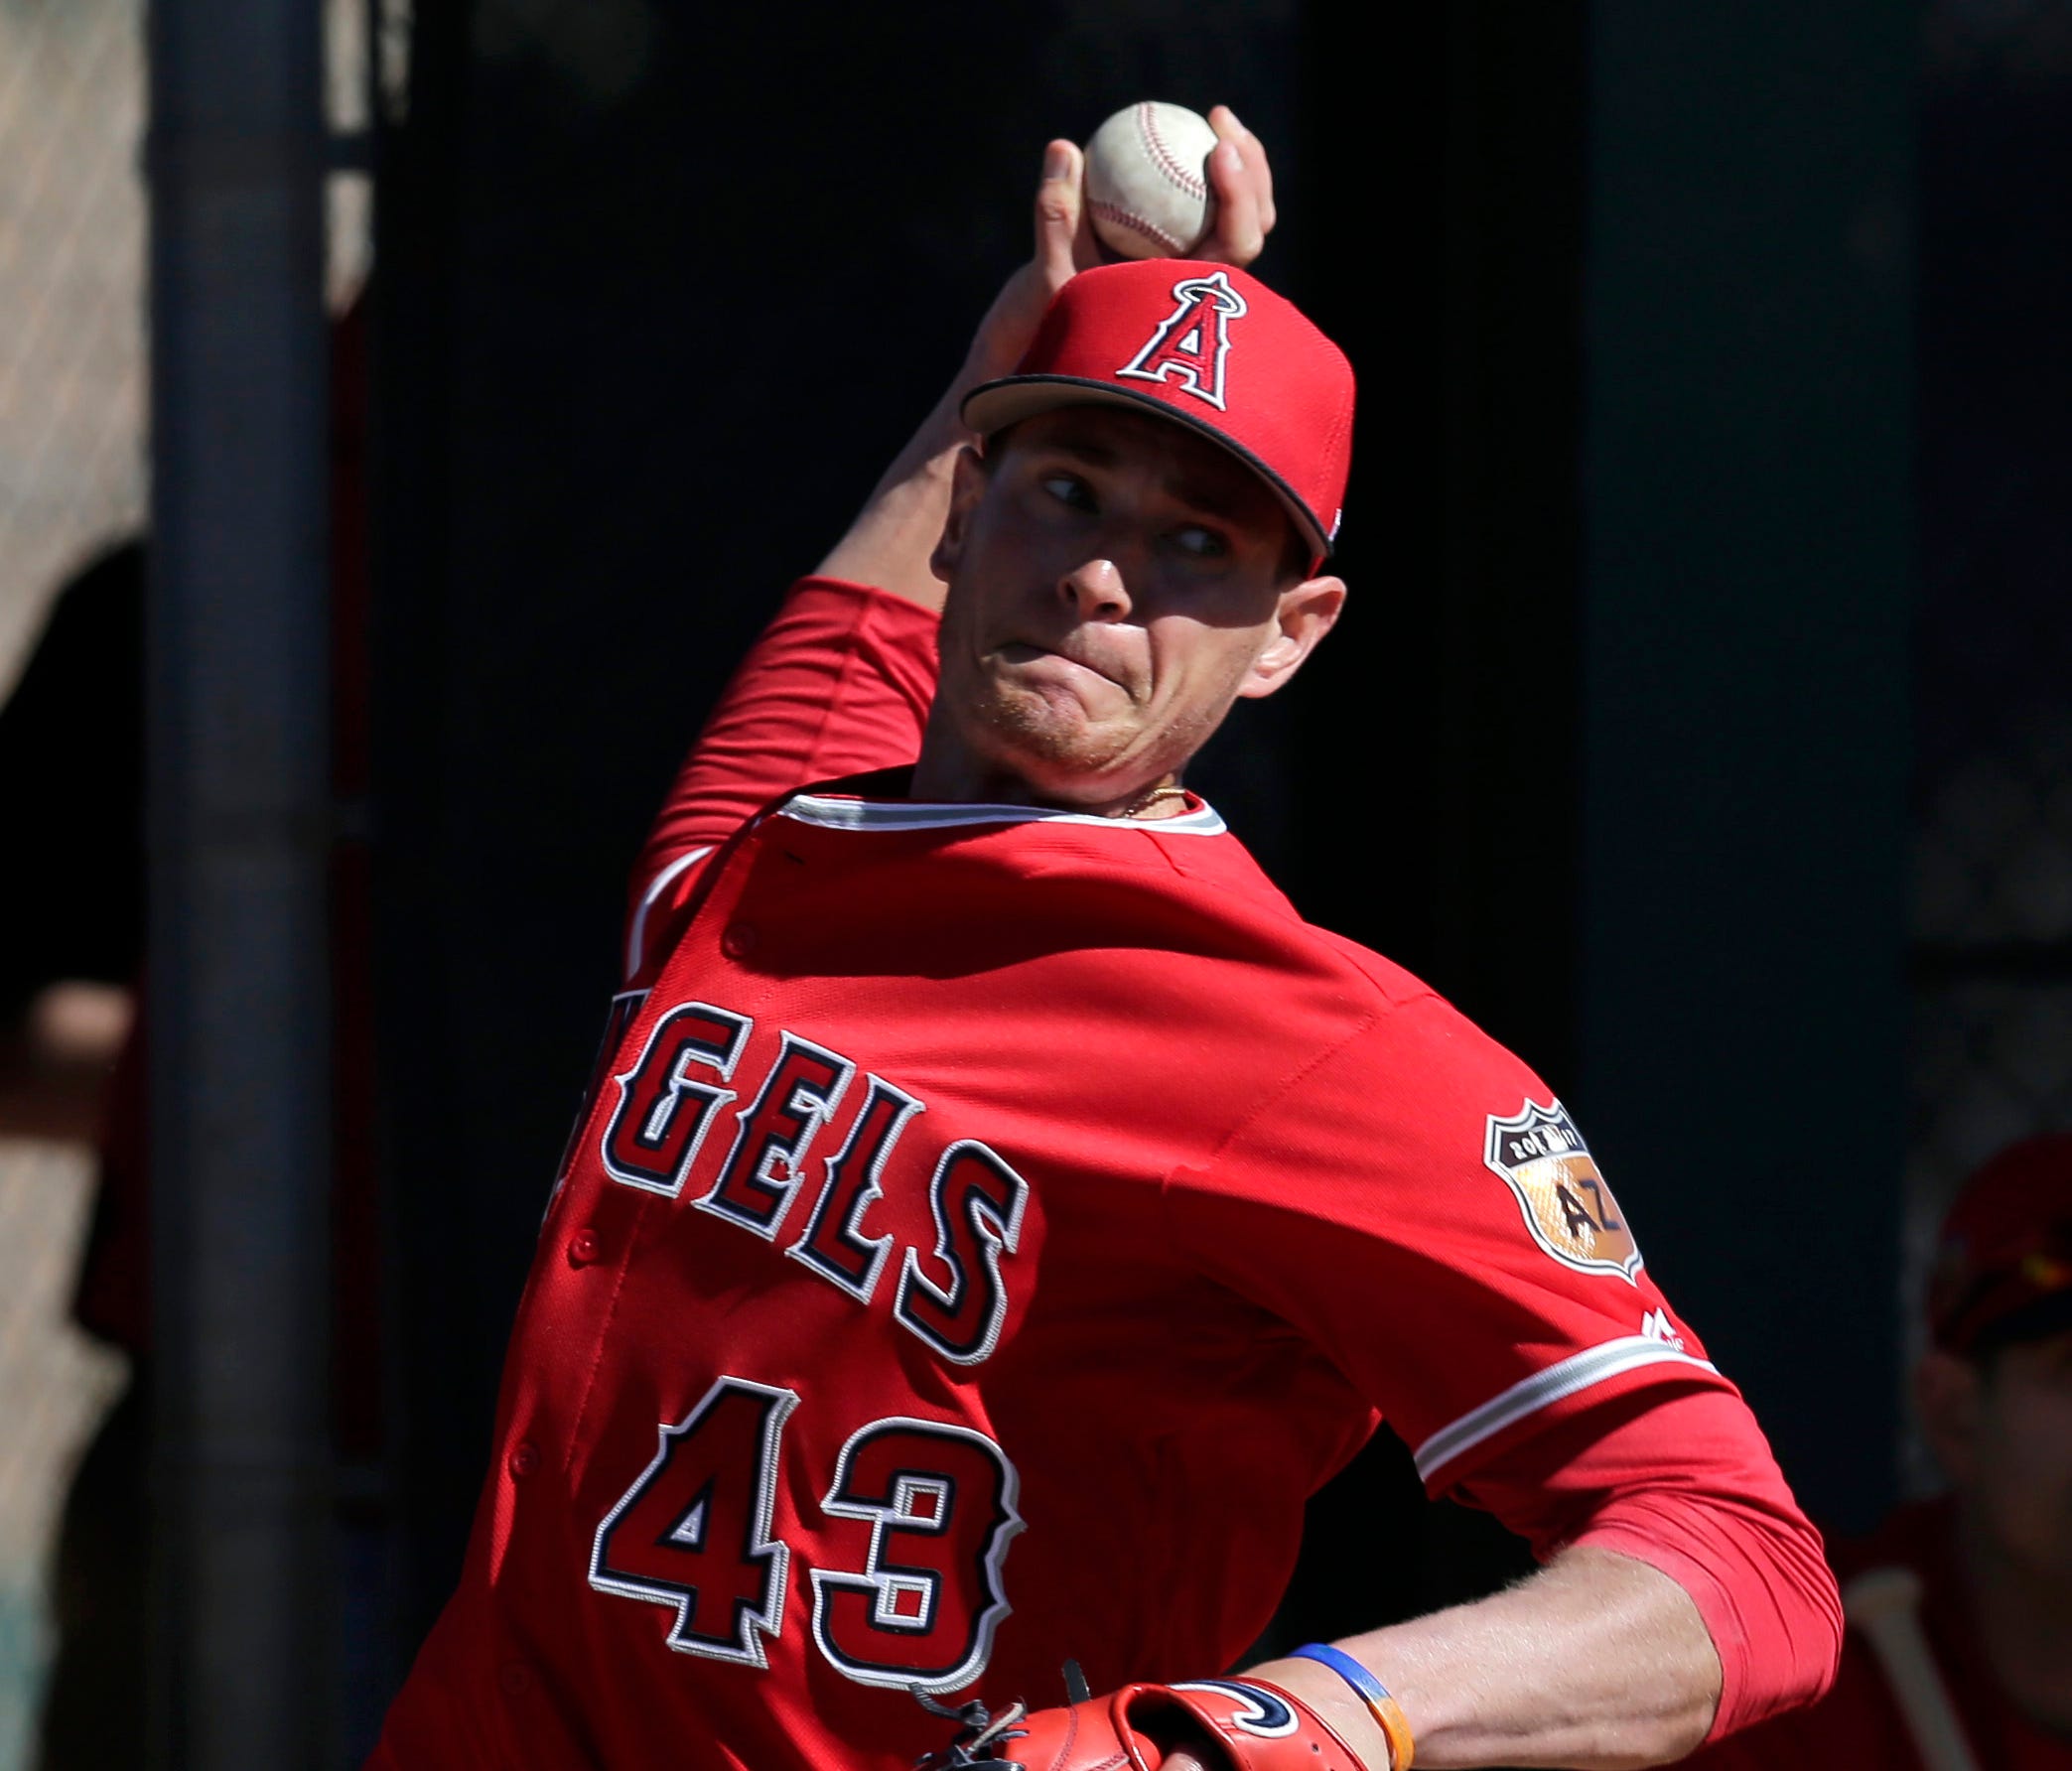 Garrett Richards is aiming to pitch through a ligament tear via stem cell therapy and other recovery methods.